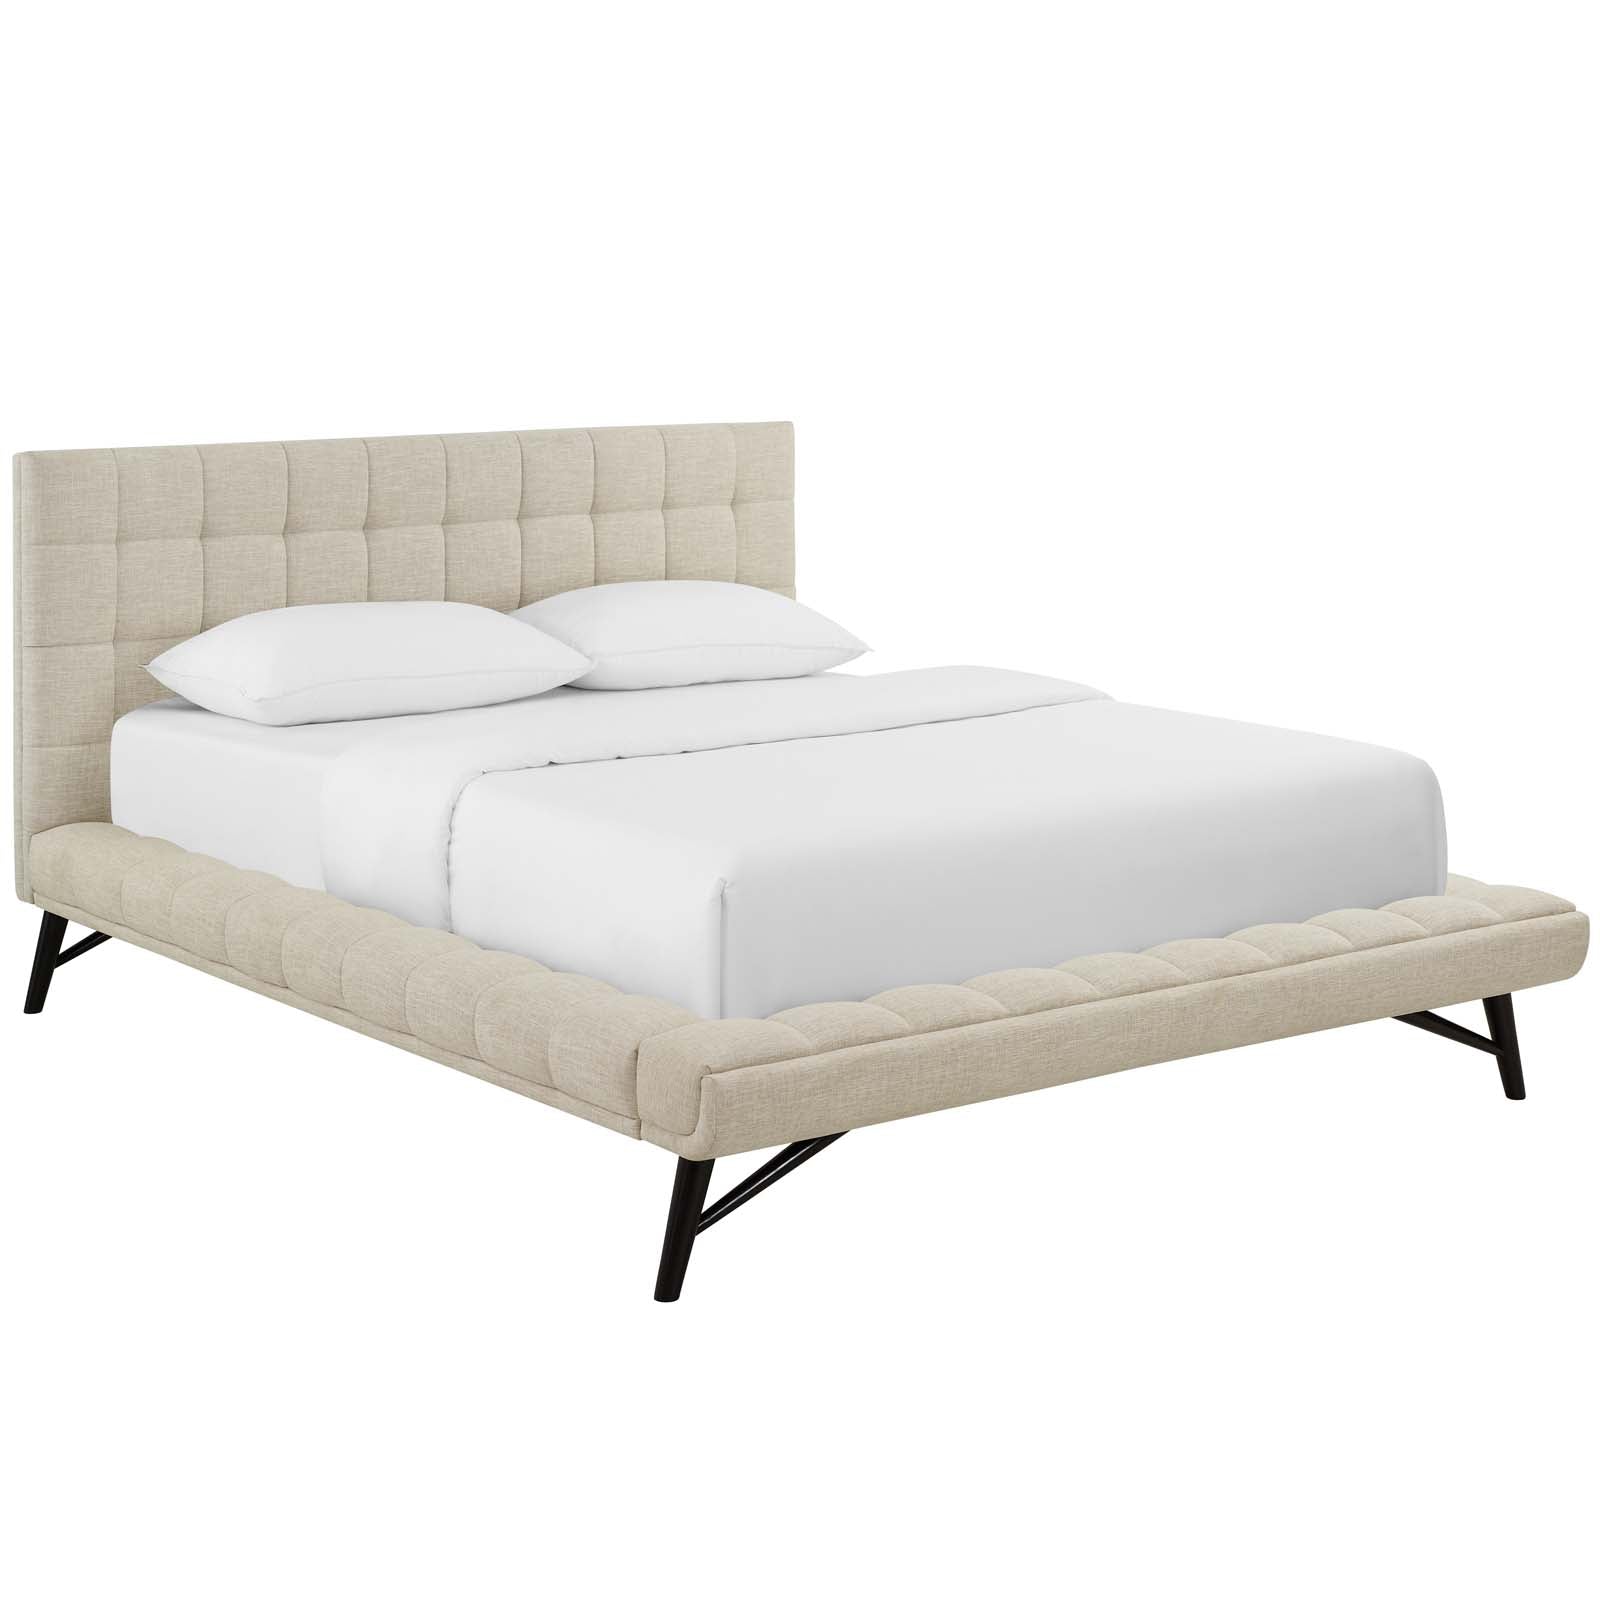 Julia Queen Biscuit Tufted Upholstered Fabric Platform Bed - East Shore Modern Home Furnishings